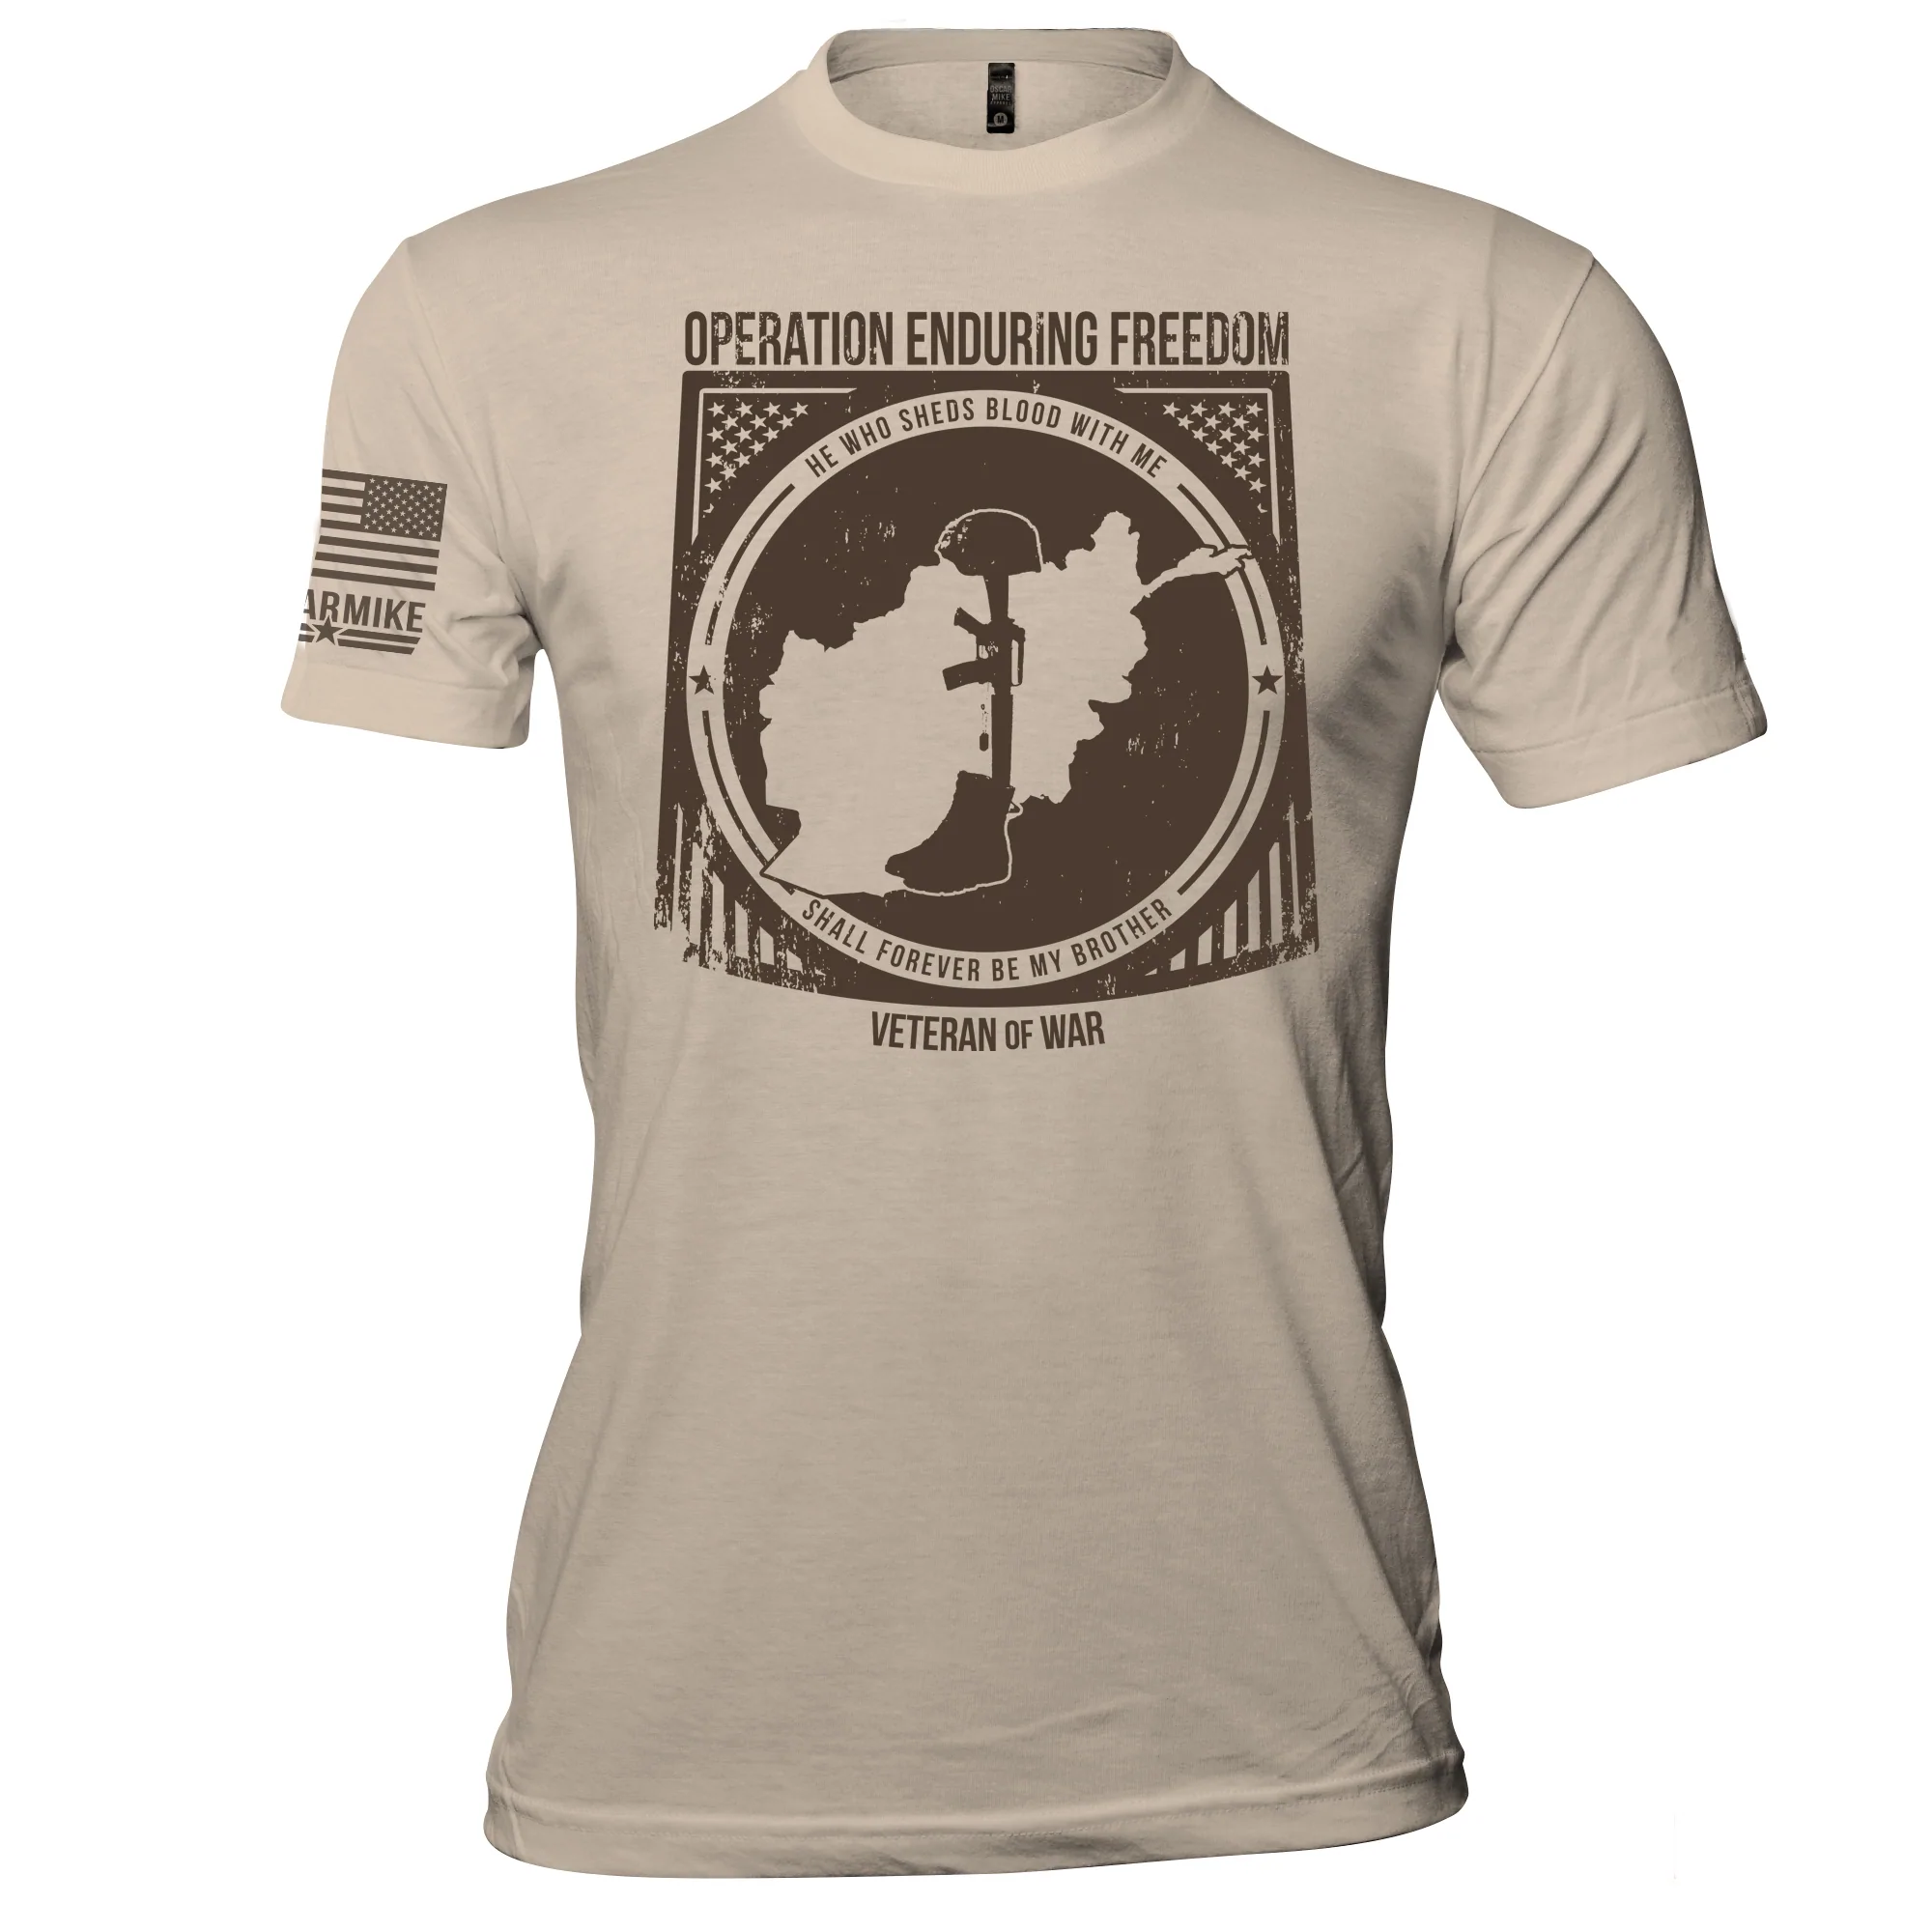 Oscar Mike Men's Operation Enduring Freedom Tee posted by ProdOrigin USA in Men's Apparel